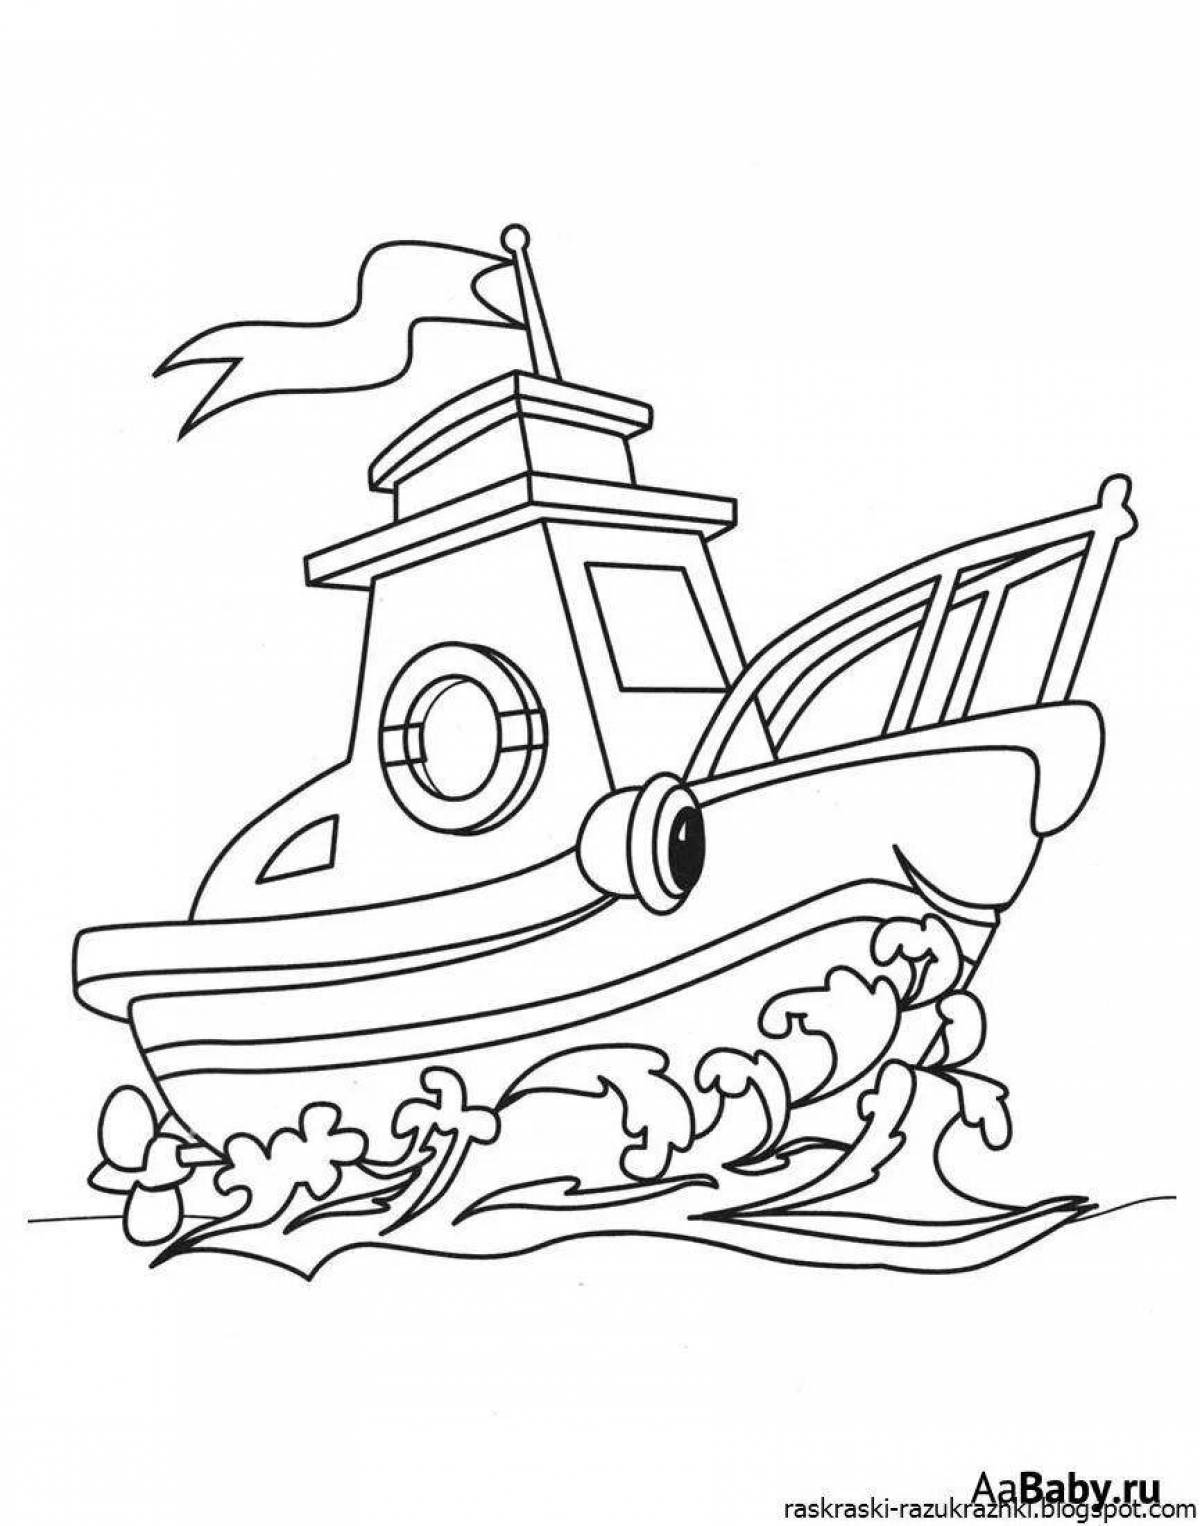 Exciting sailboat coloring book for kids